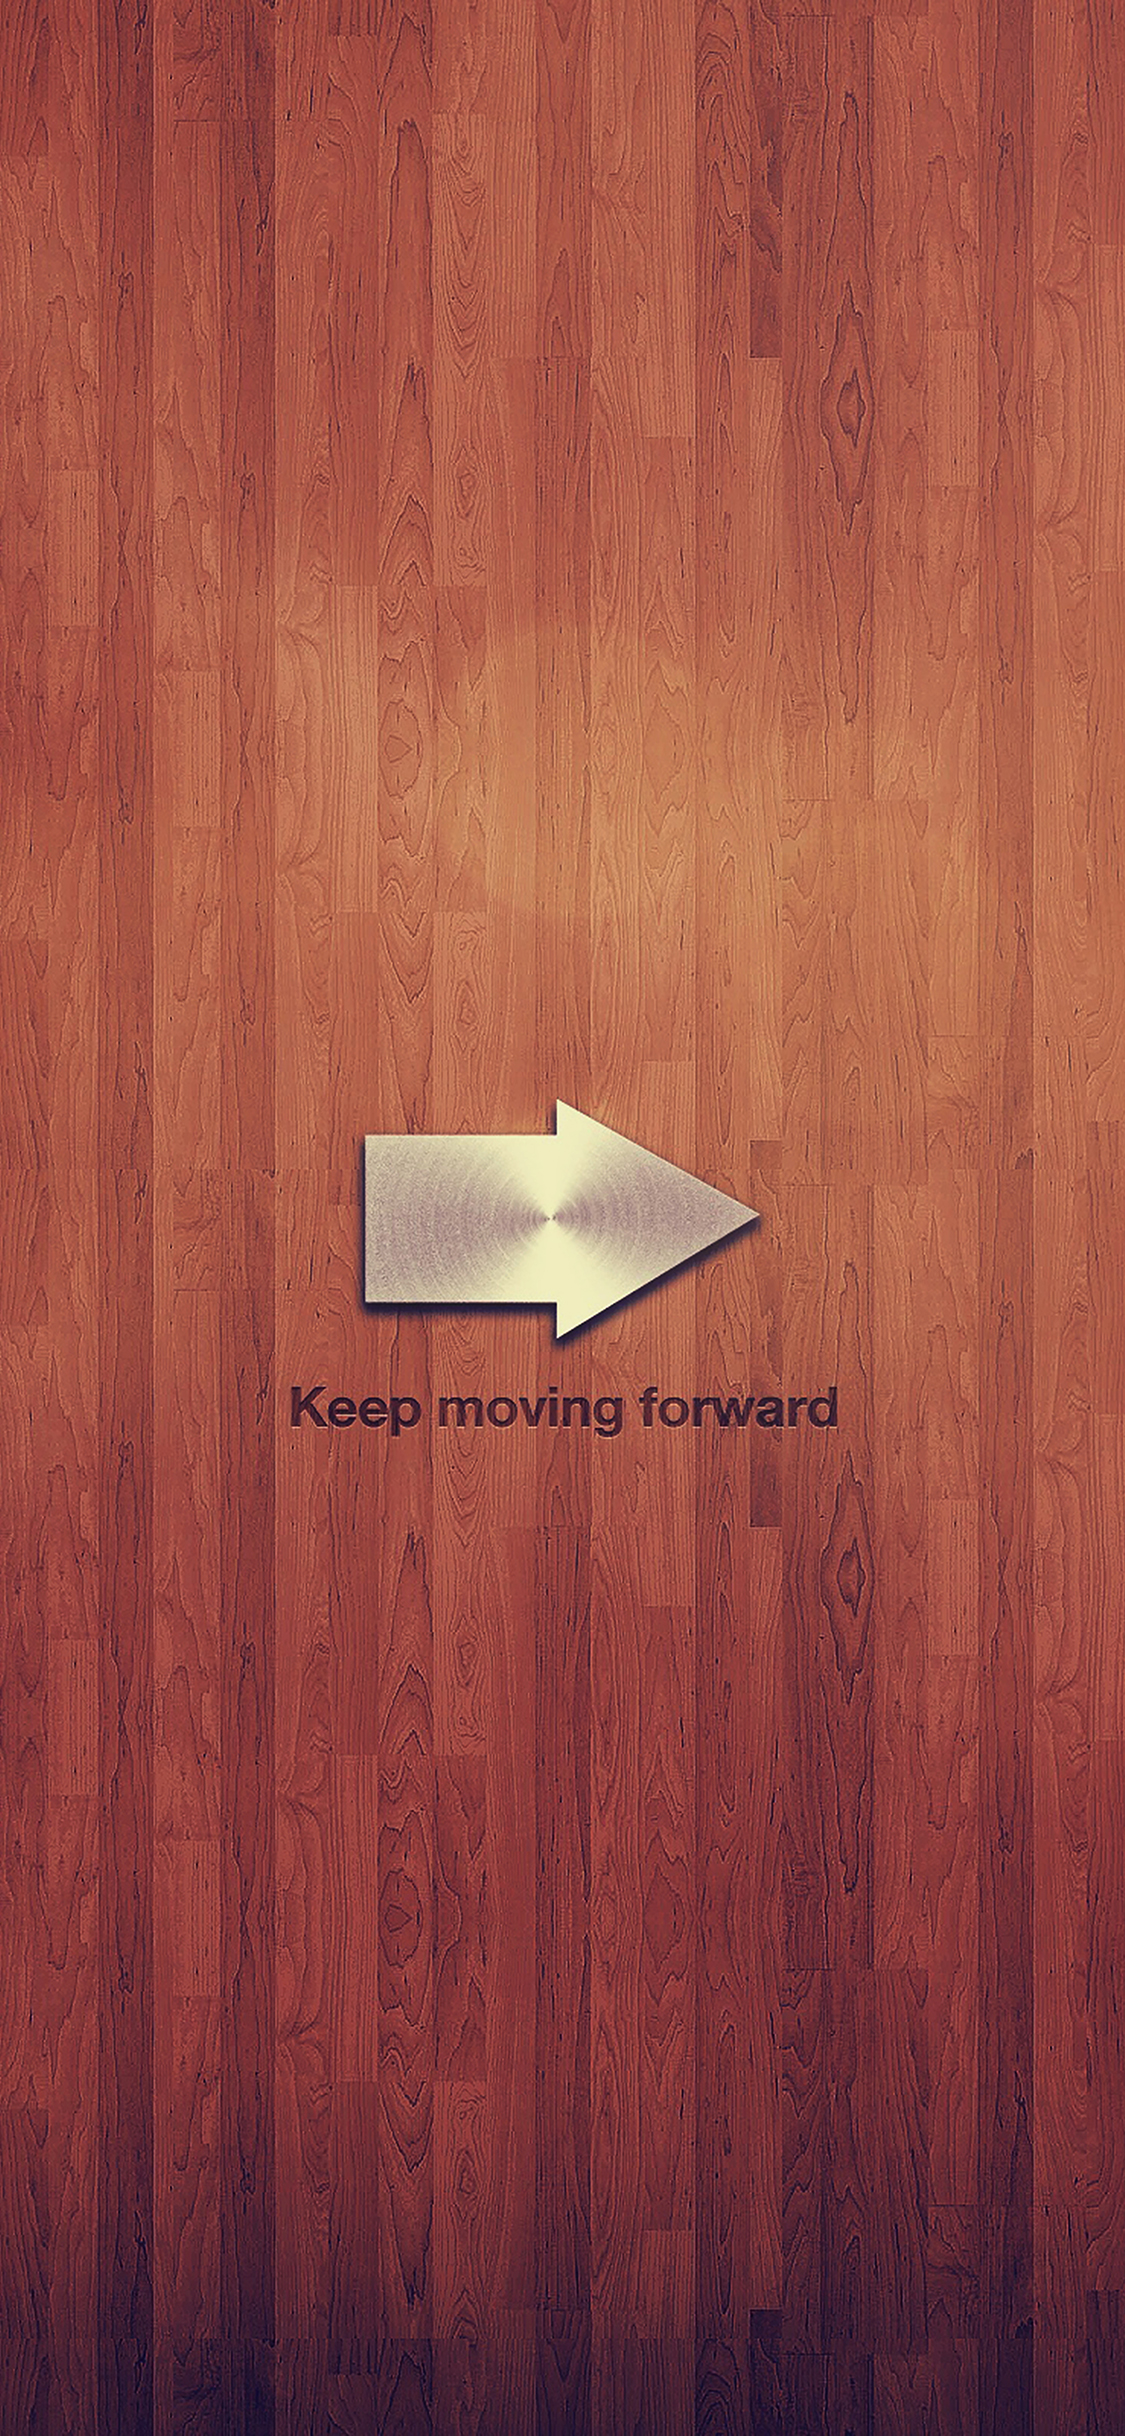 Keep moving forward blue quote tree